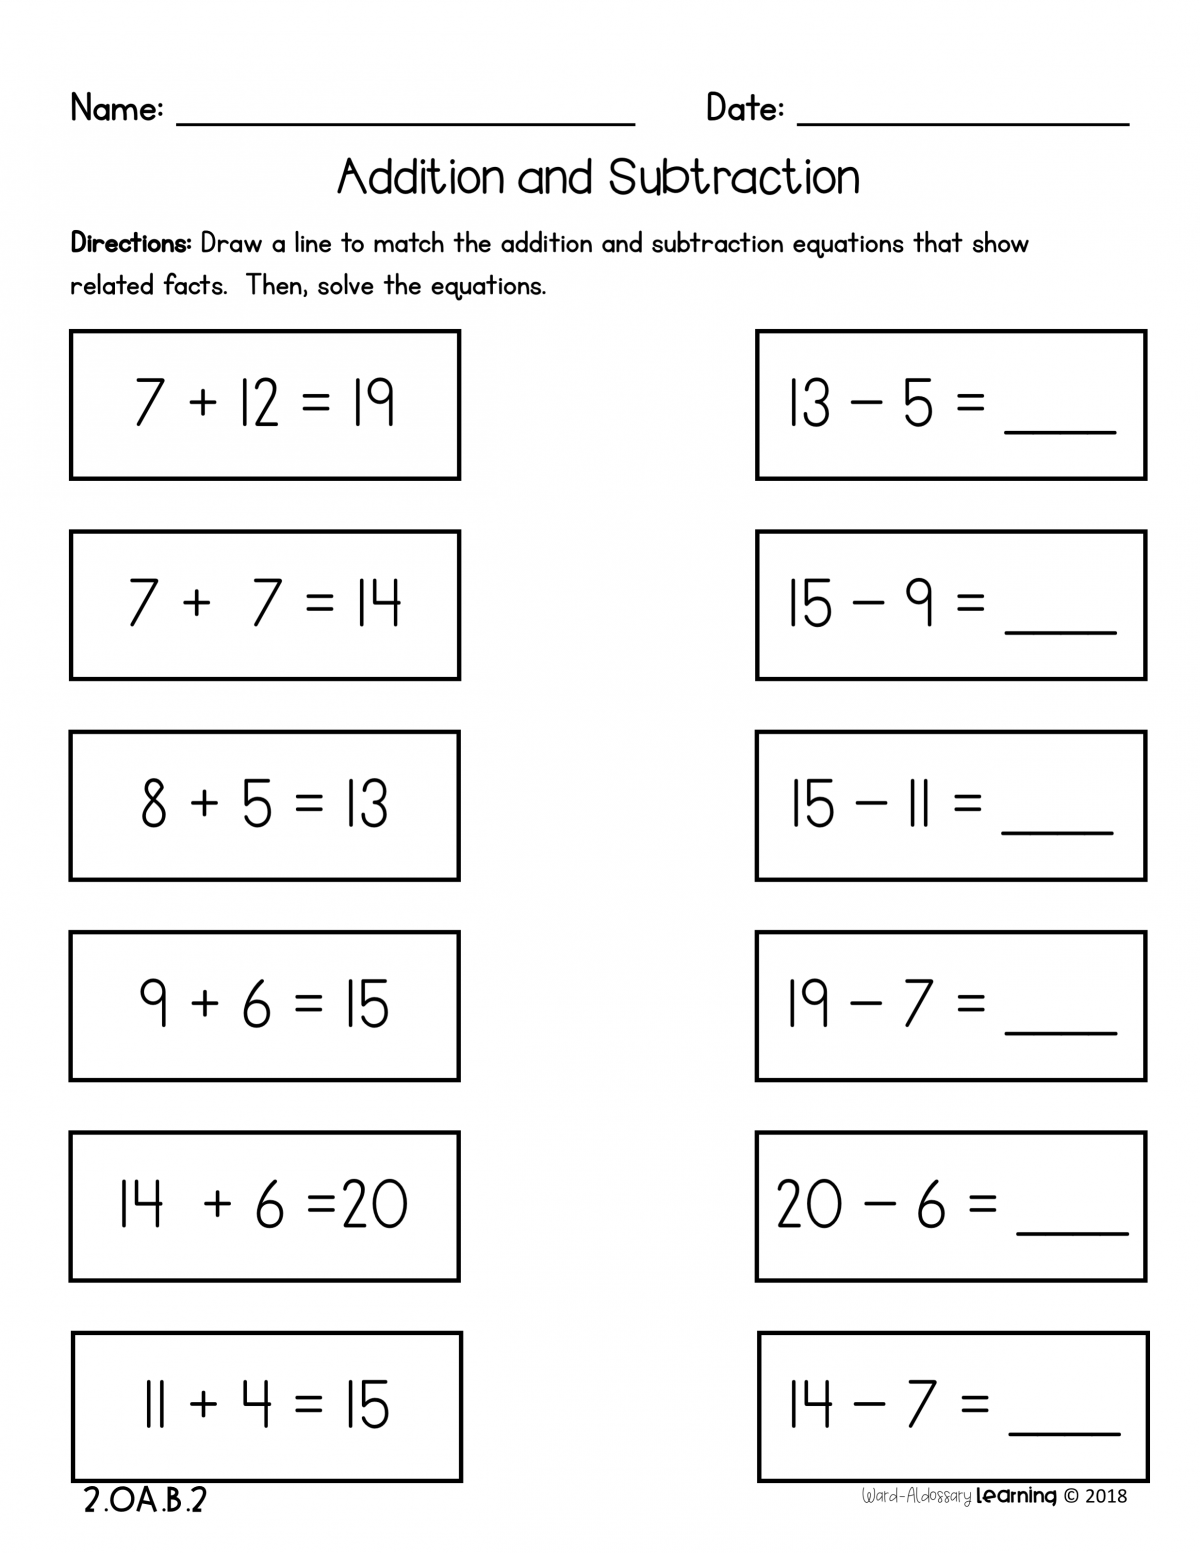 addition-and-subtraction-within-20-worksheets-worksheetscity